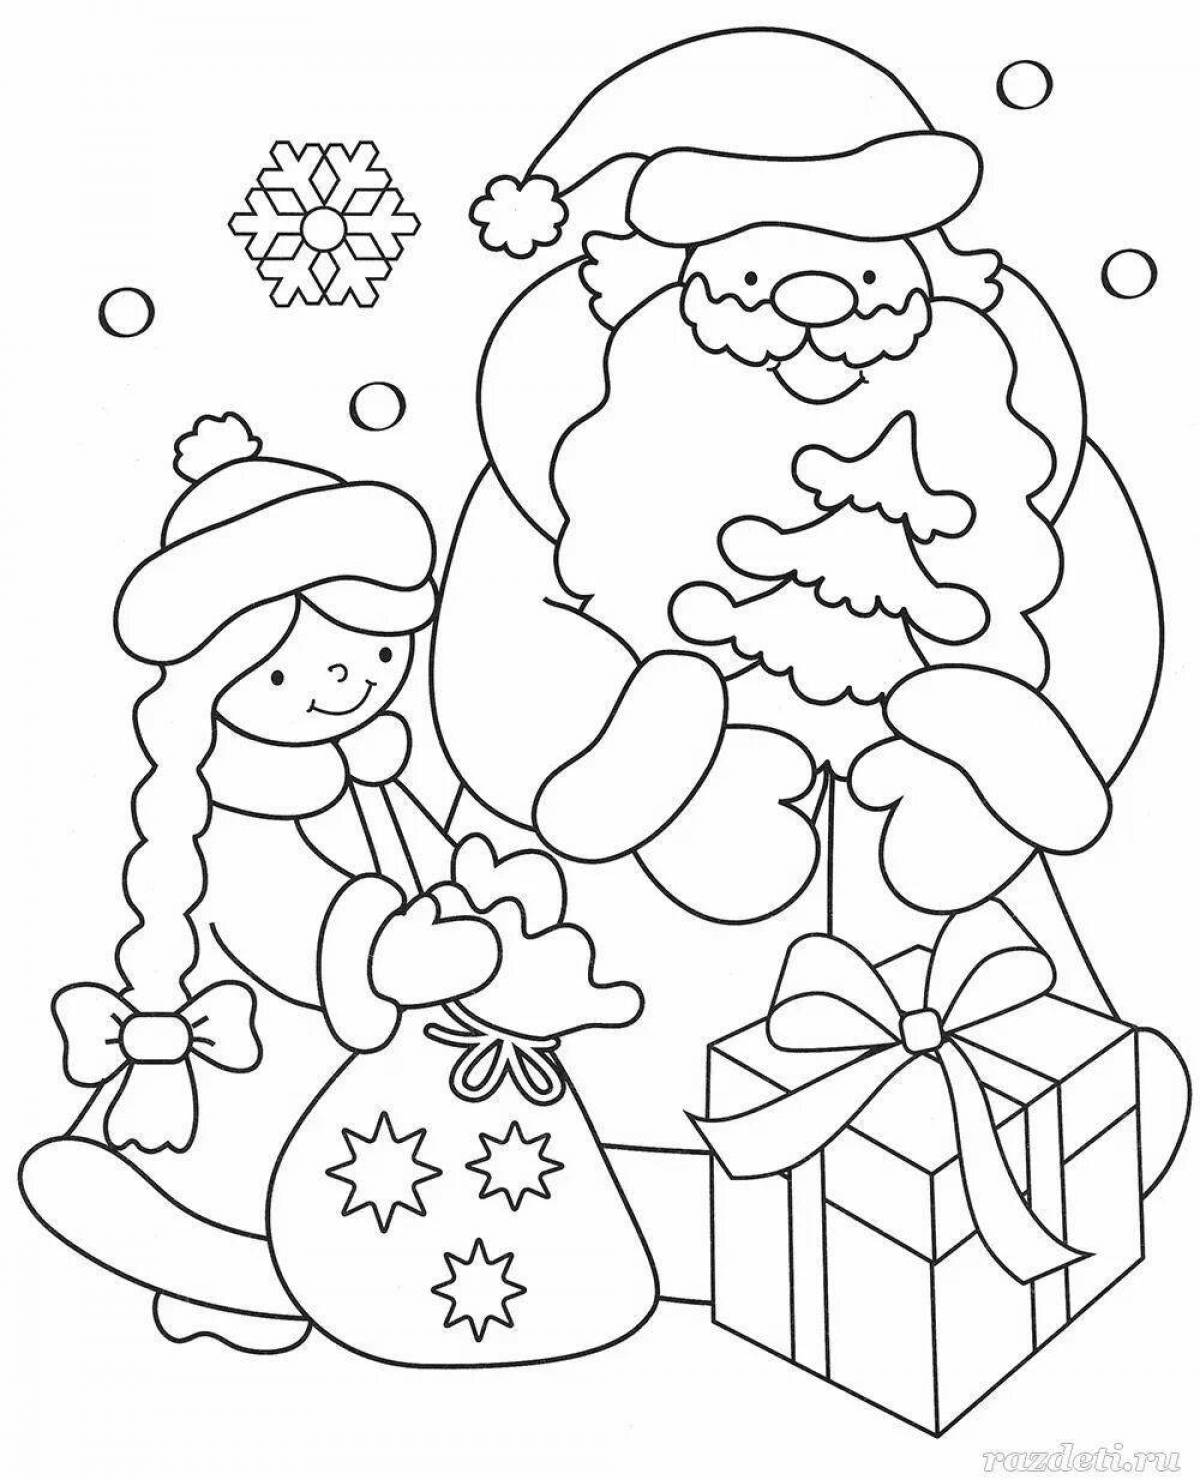 Sweet Christmas coloring book for kids 6-7 years old